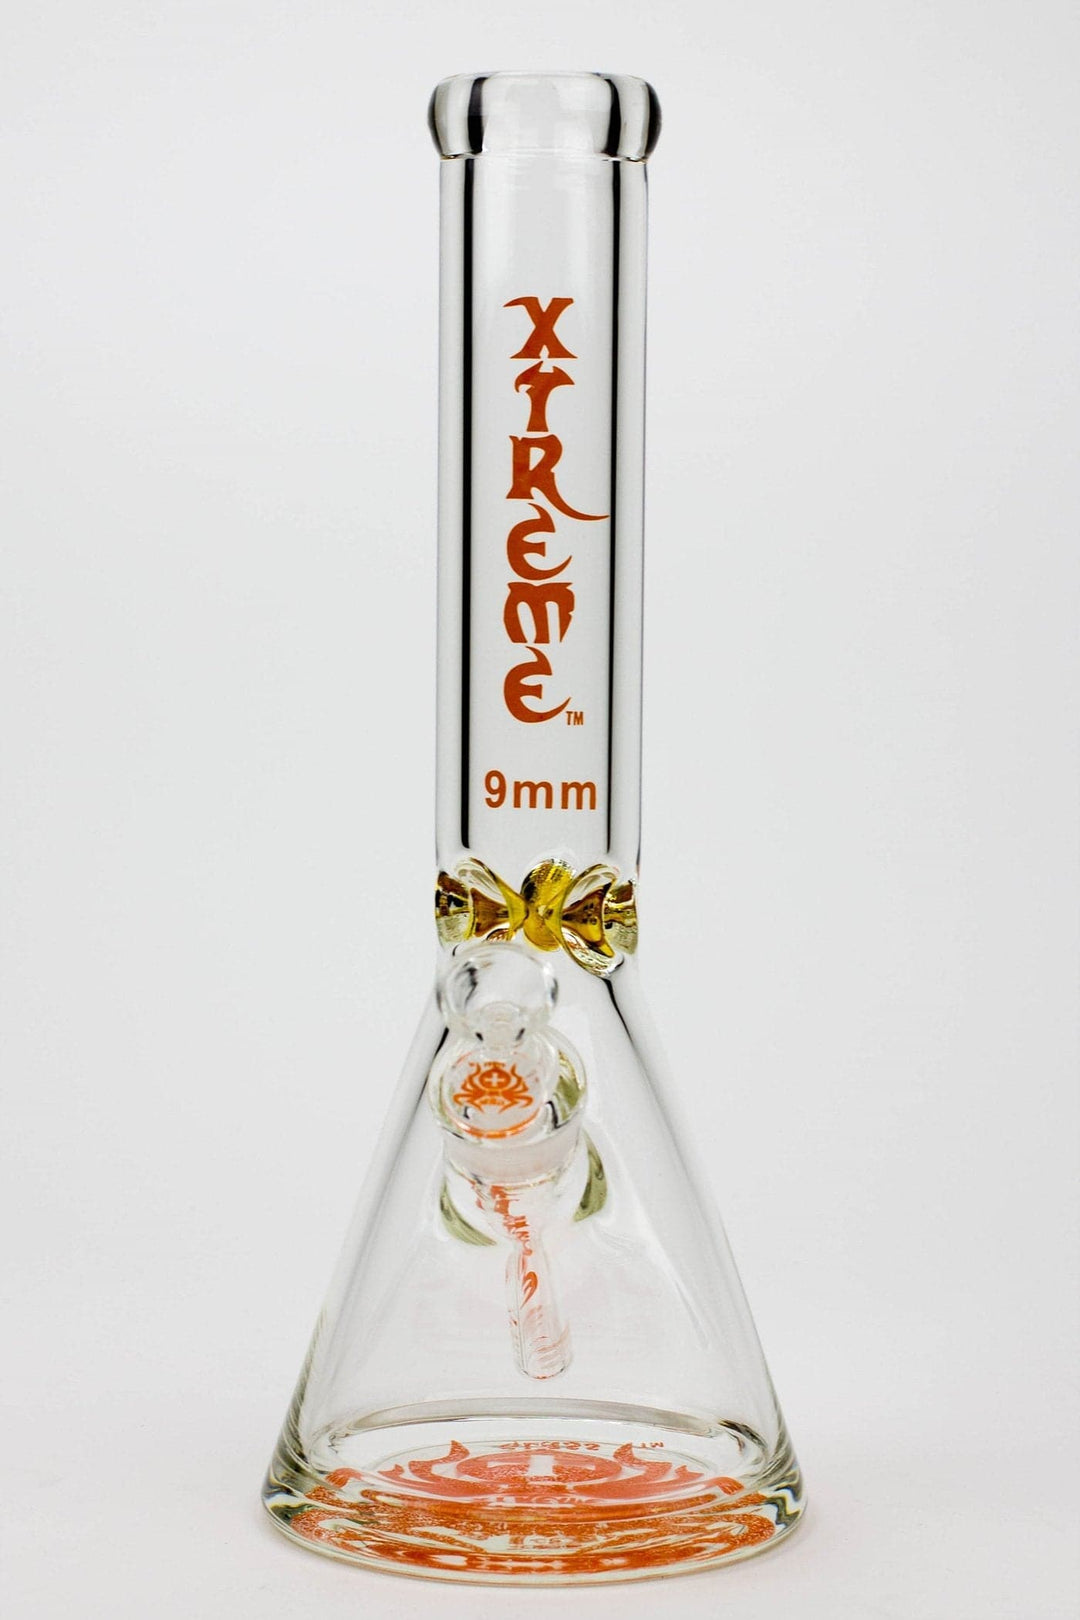 Xtreme glass classic glass beaker water pipes_13